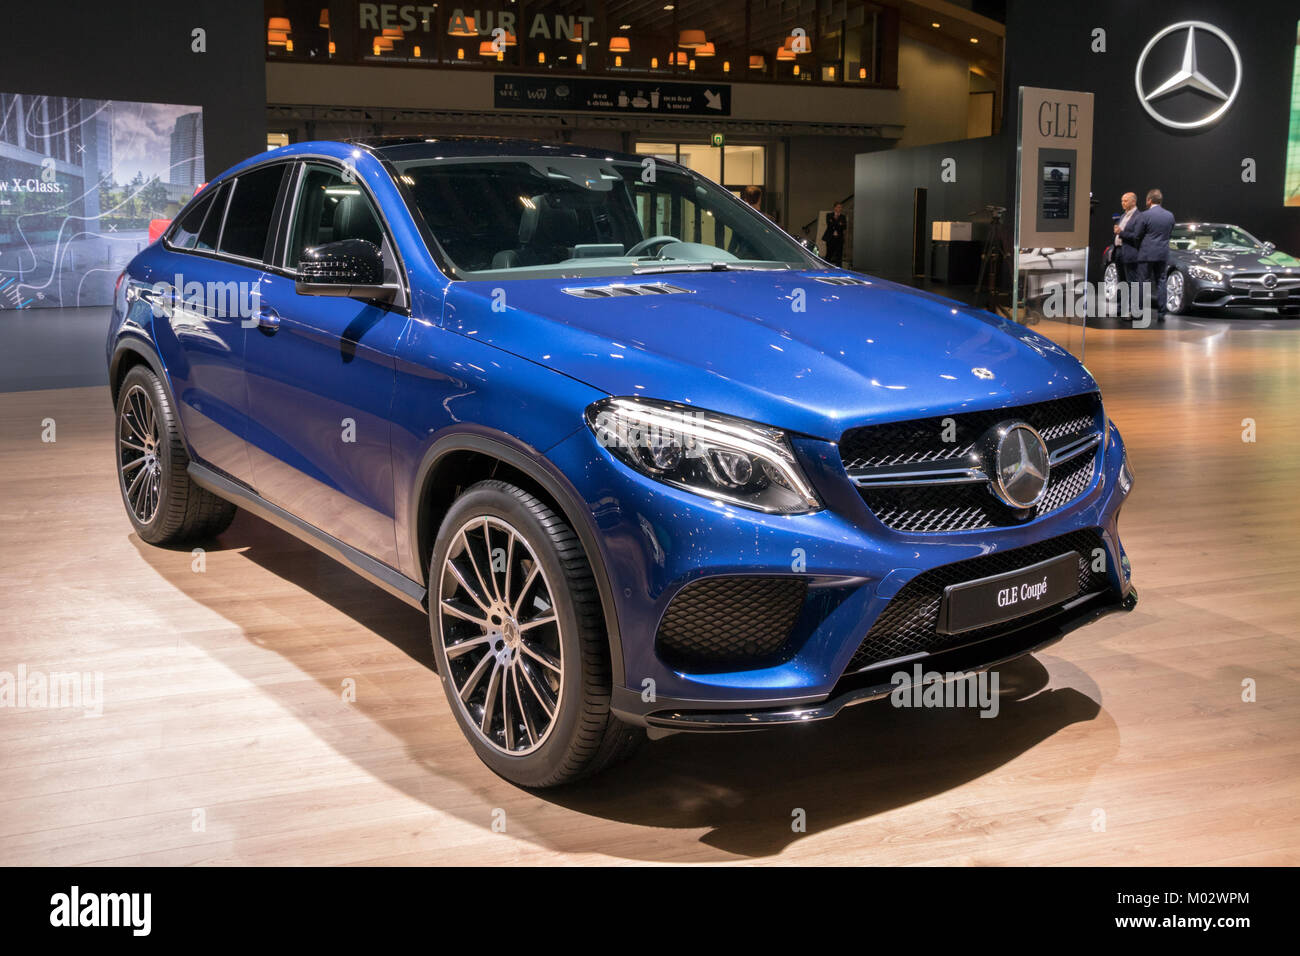 Gle Coupe Stock Photos Gle Coupe Stock Images Alamy